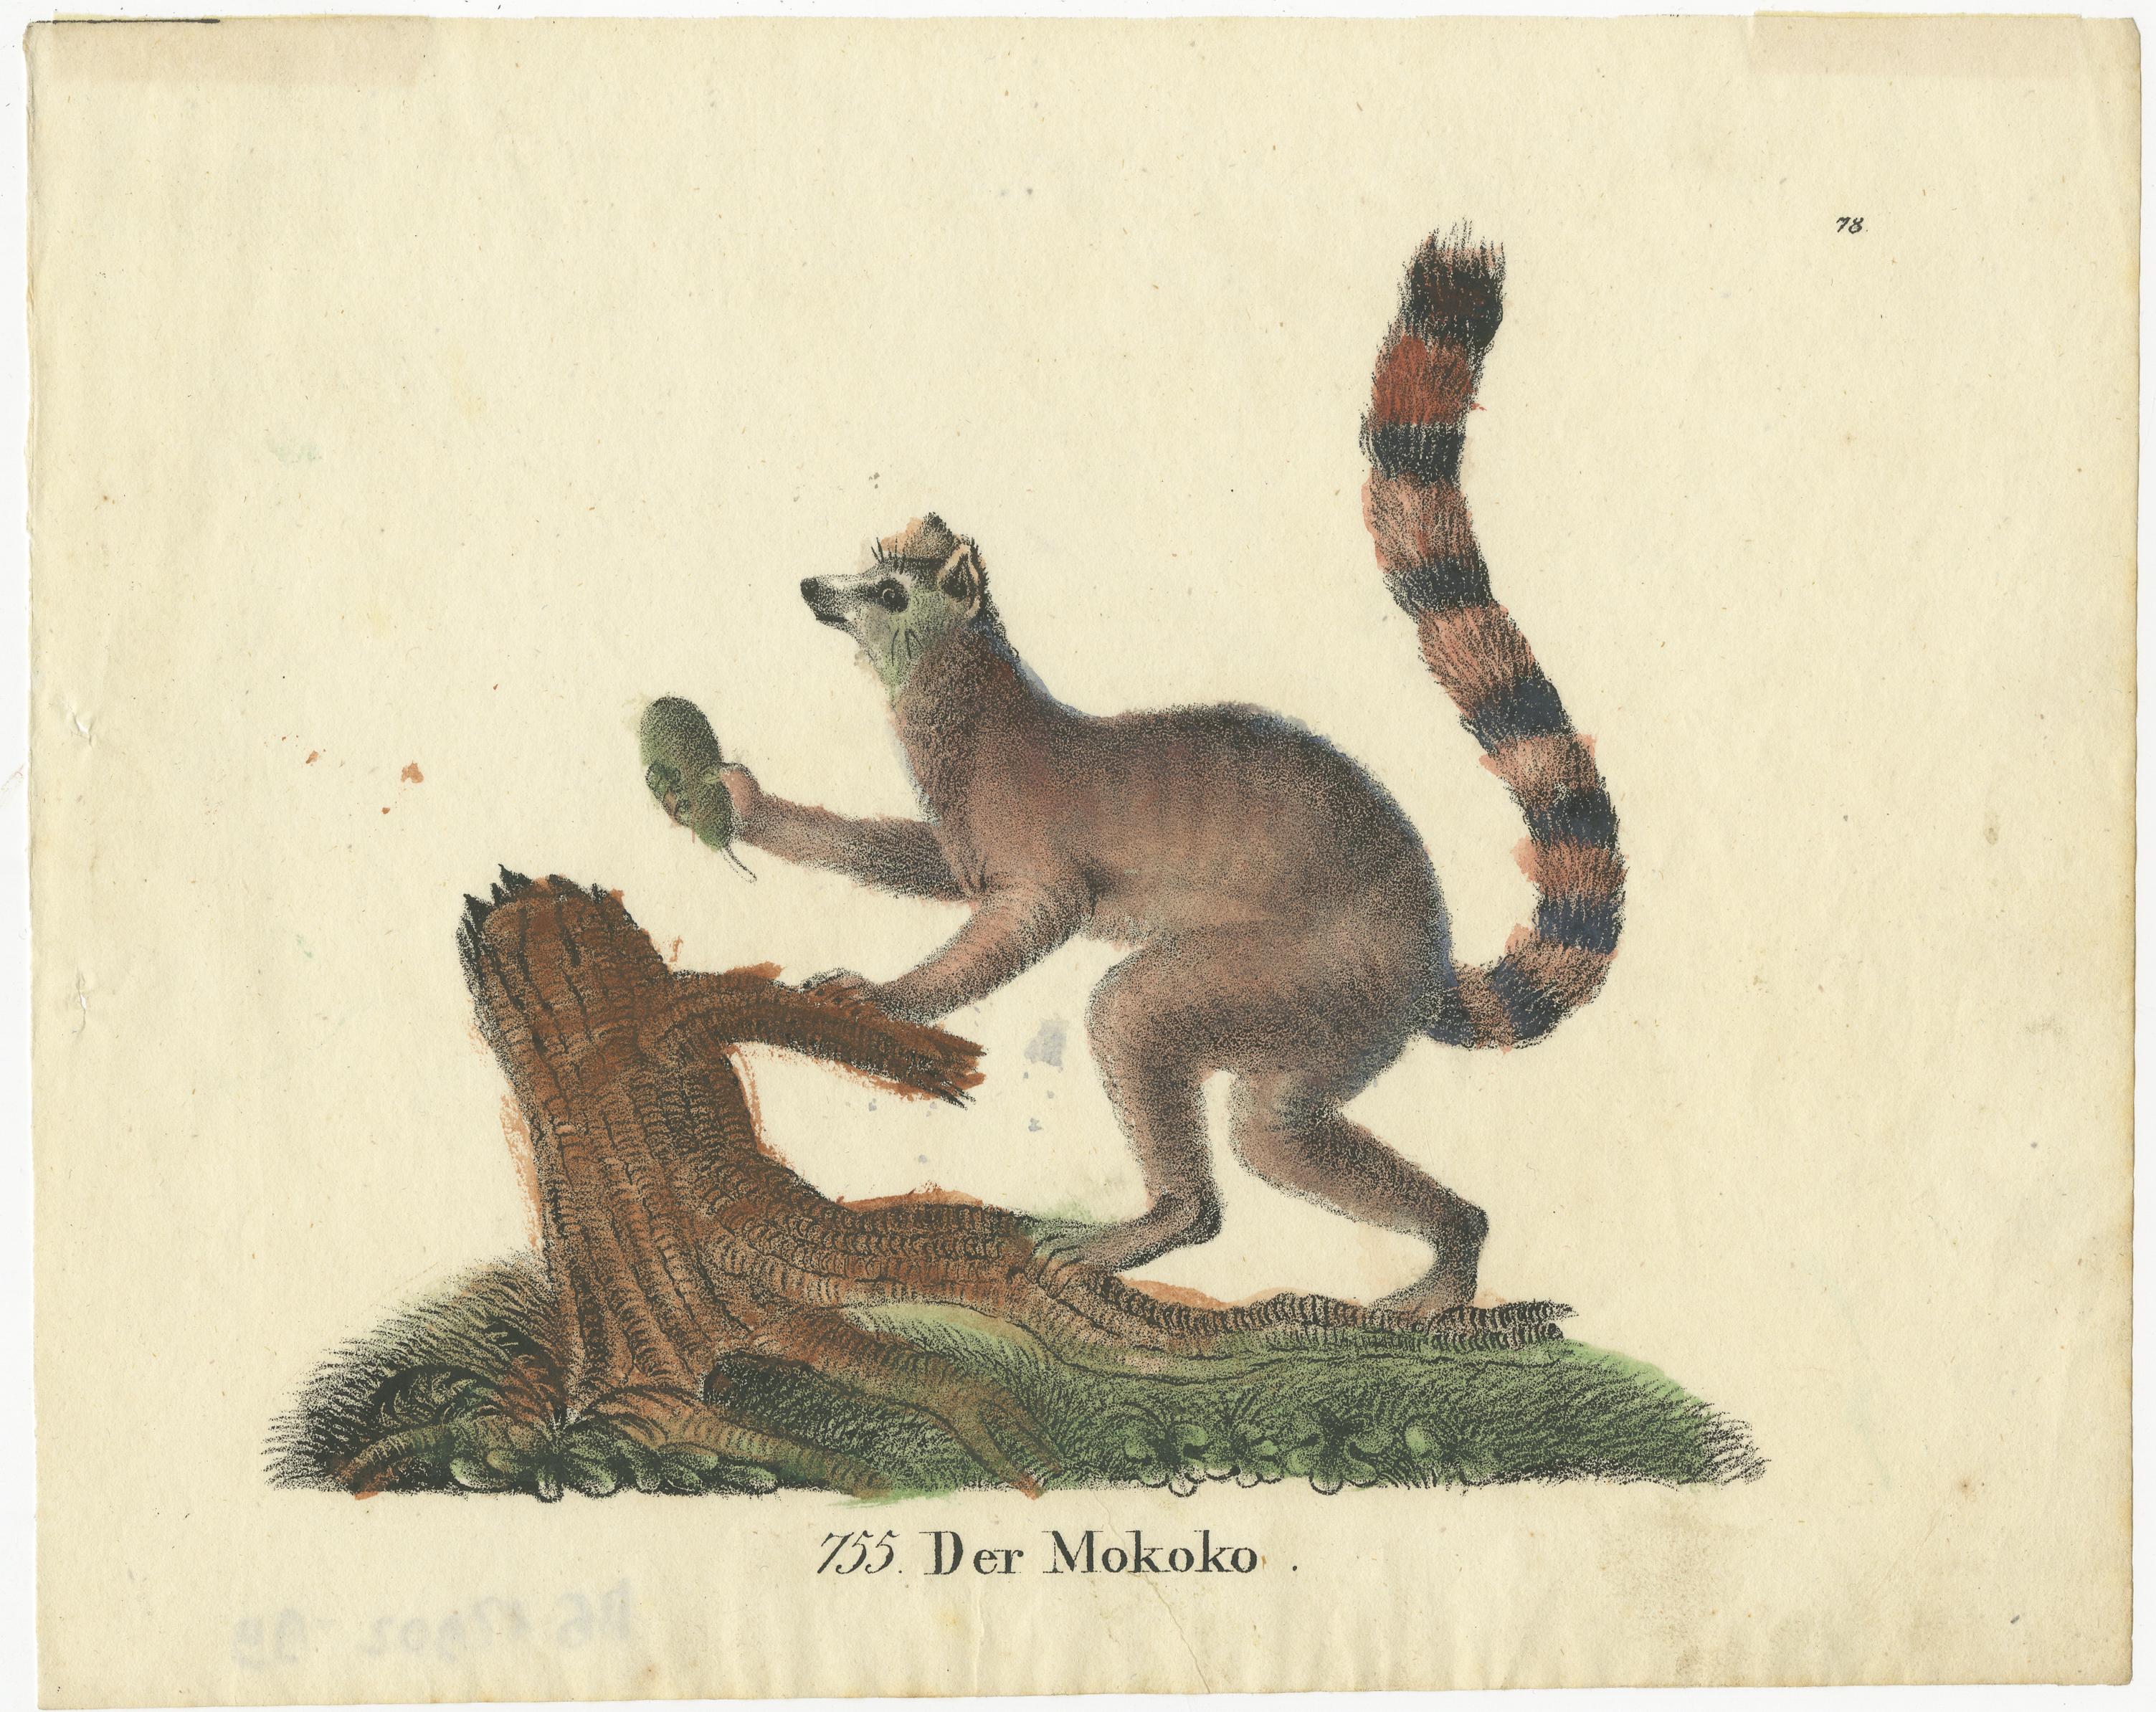 Original antique print titled 'Der Mokoko'. Antique print of a mokoko or Ring-tailed lemur (Lemur catta).

The ring-tailed lemur (Lemur catta) is a large strepsirrhine primate and the most recognized lemur due to its long, black and white ringed